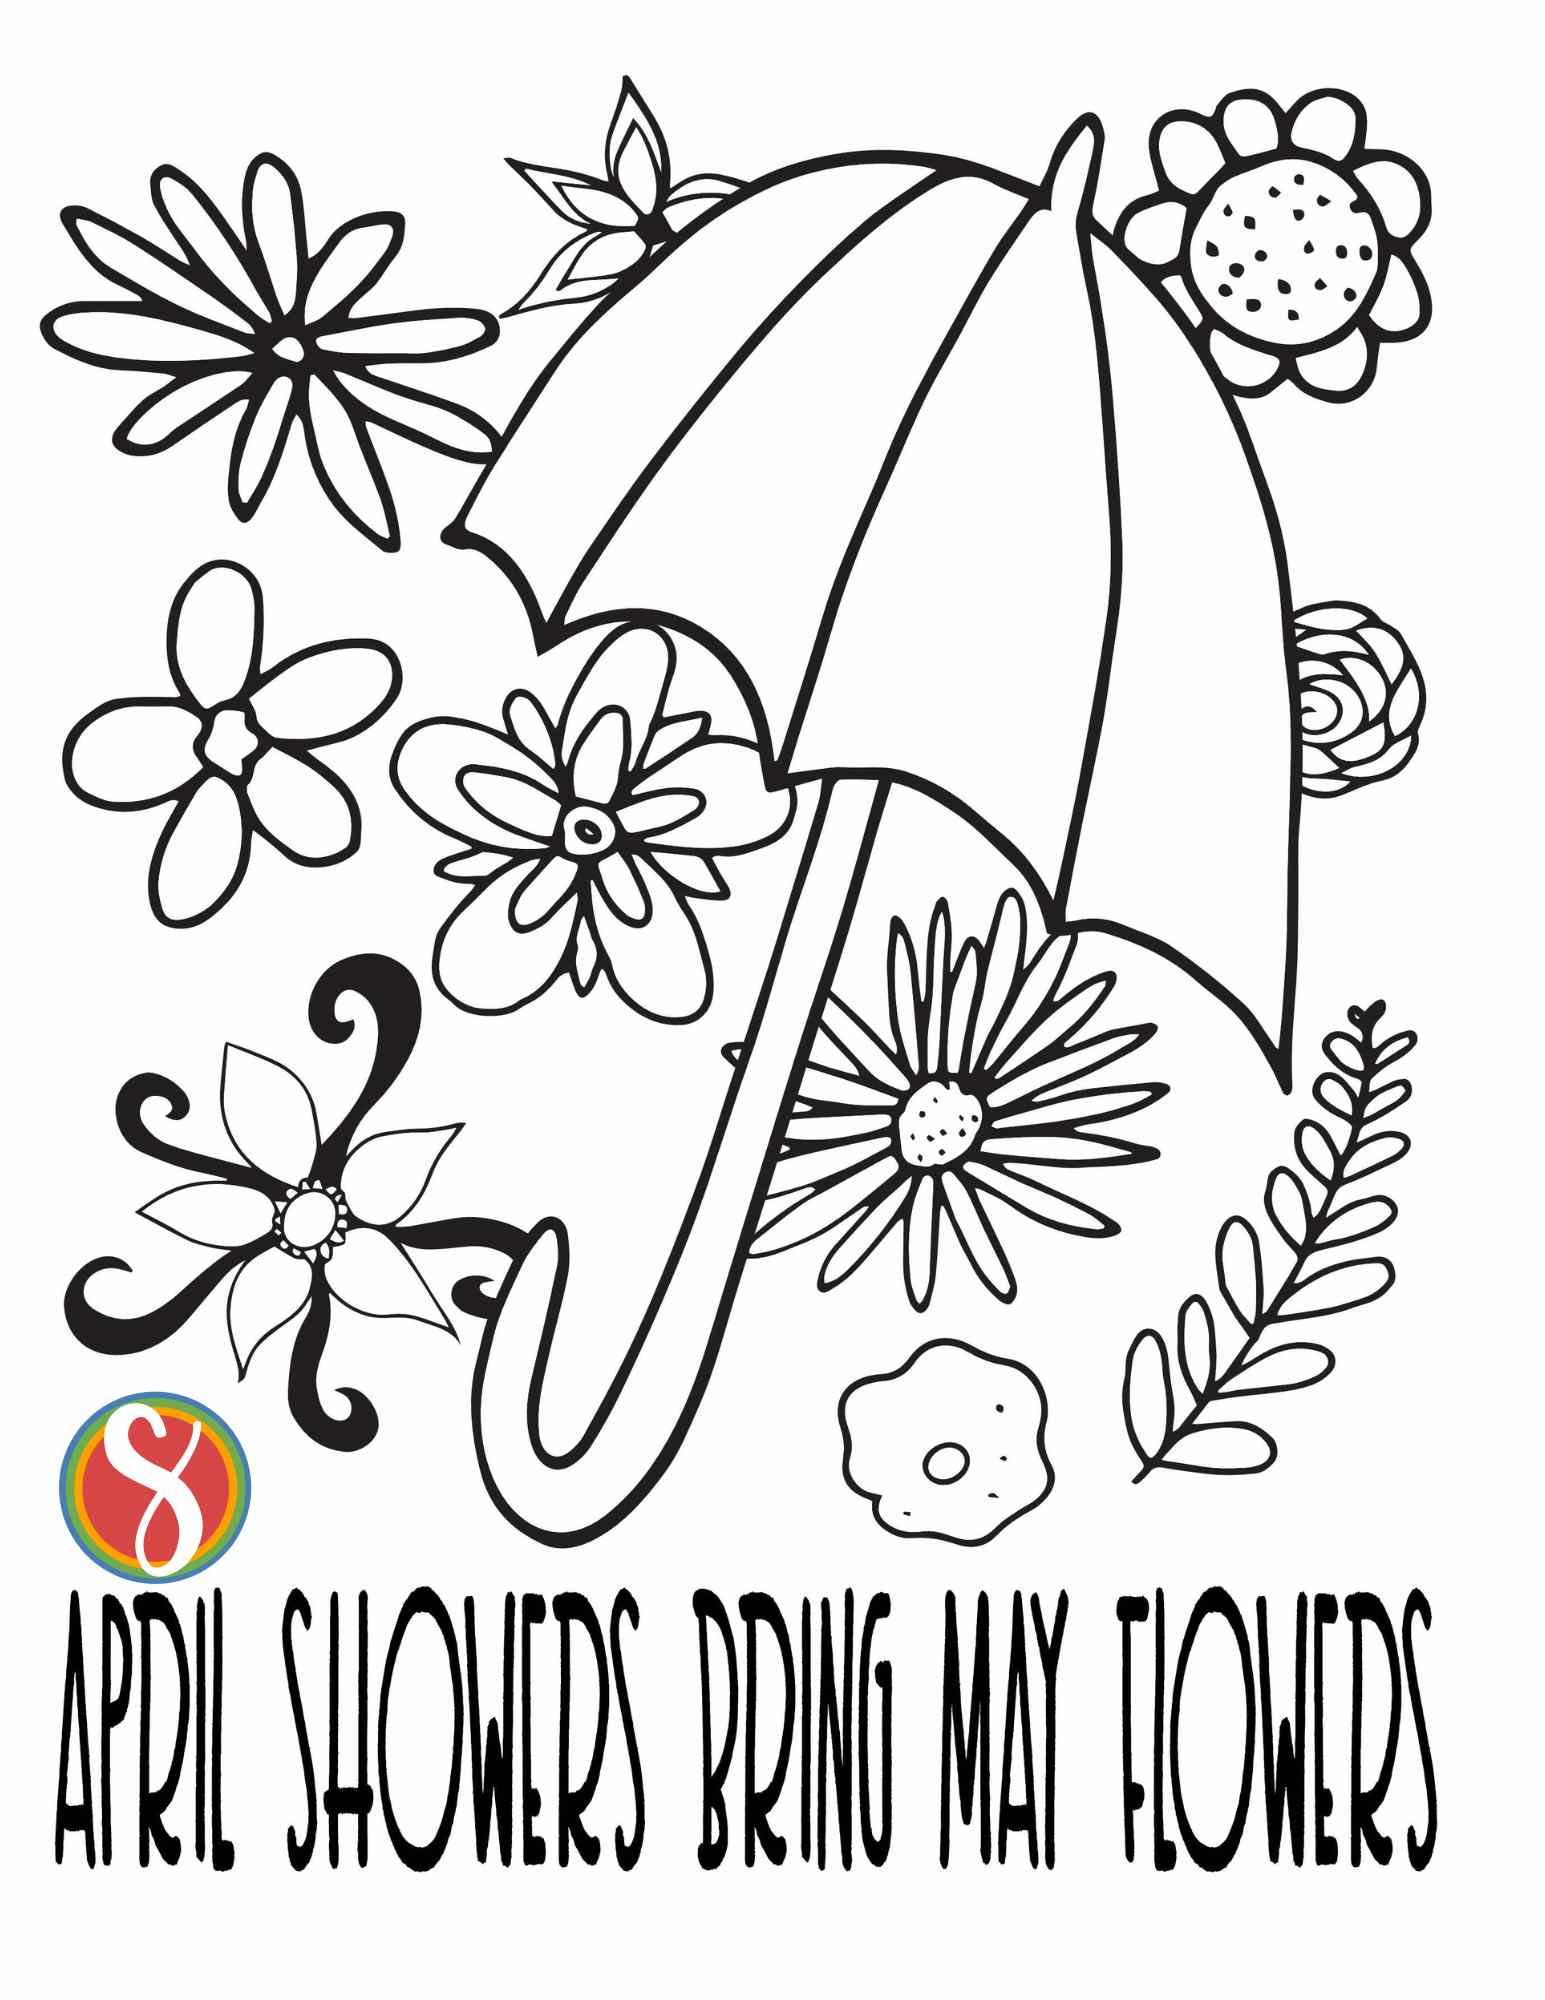 umbrella with background of flowers, text reads "april showers bring may flowers"